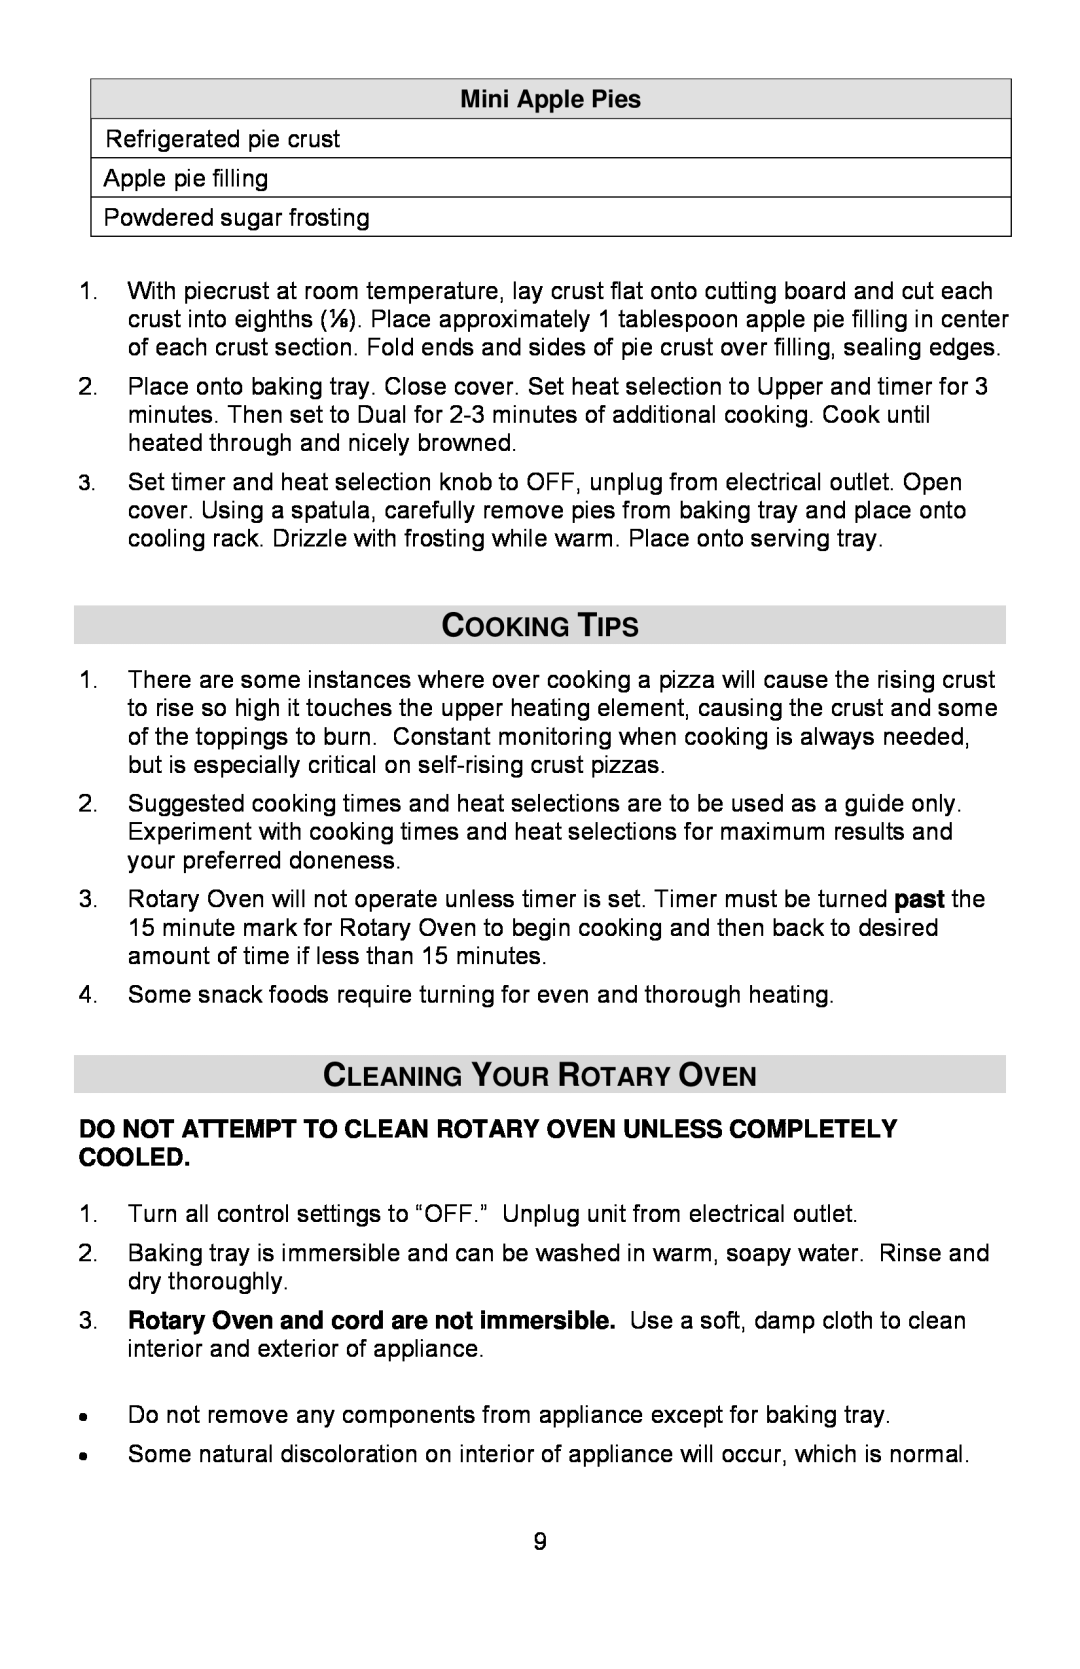 West Bend instruction manual Cooking Tips, Cleaning Your Rotary Oven 